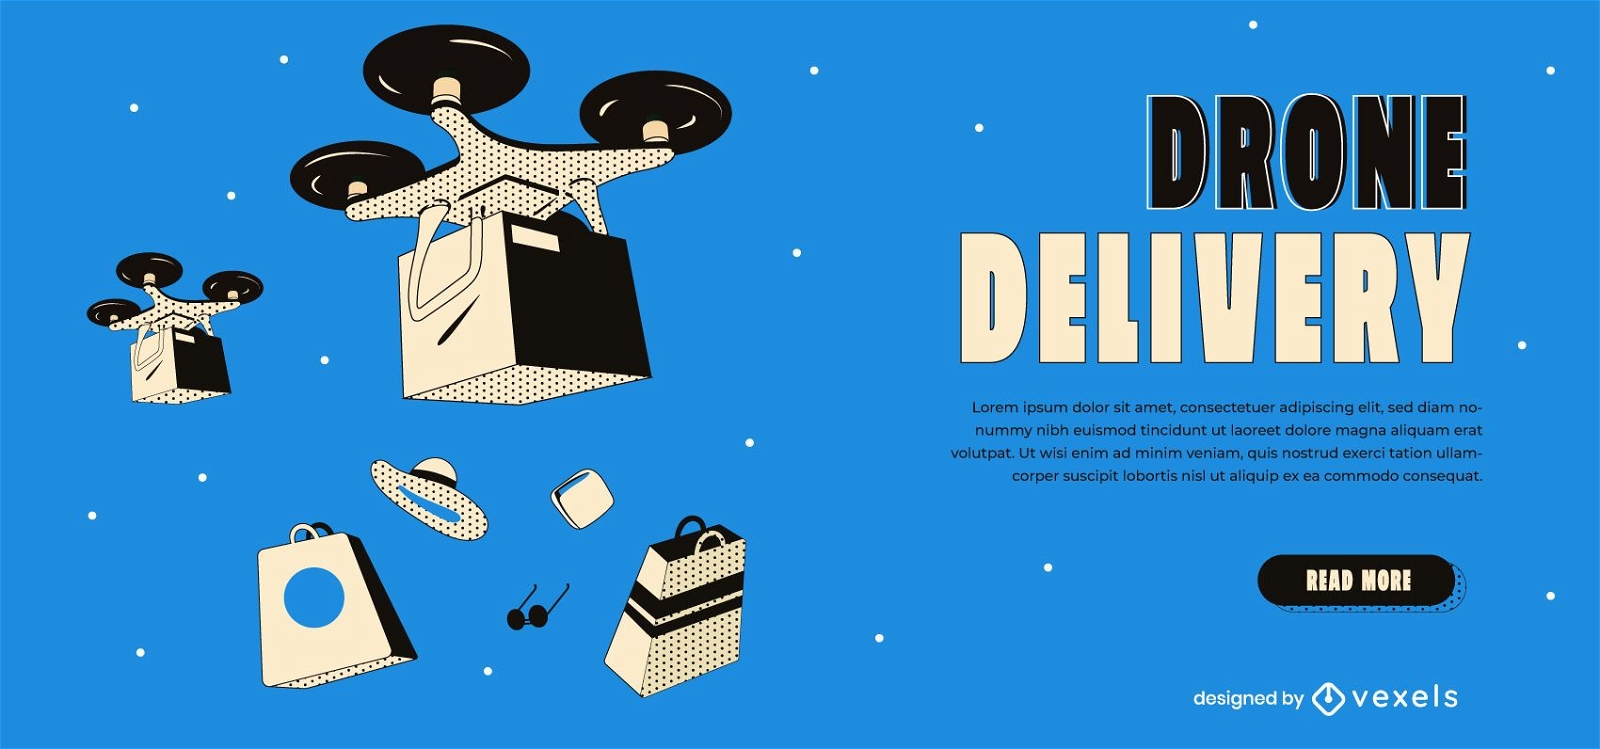 Drone delivery slider template